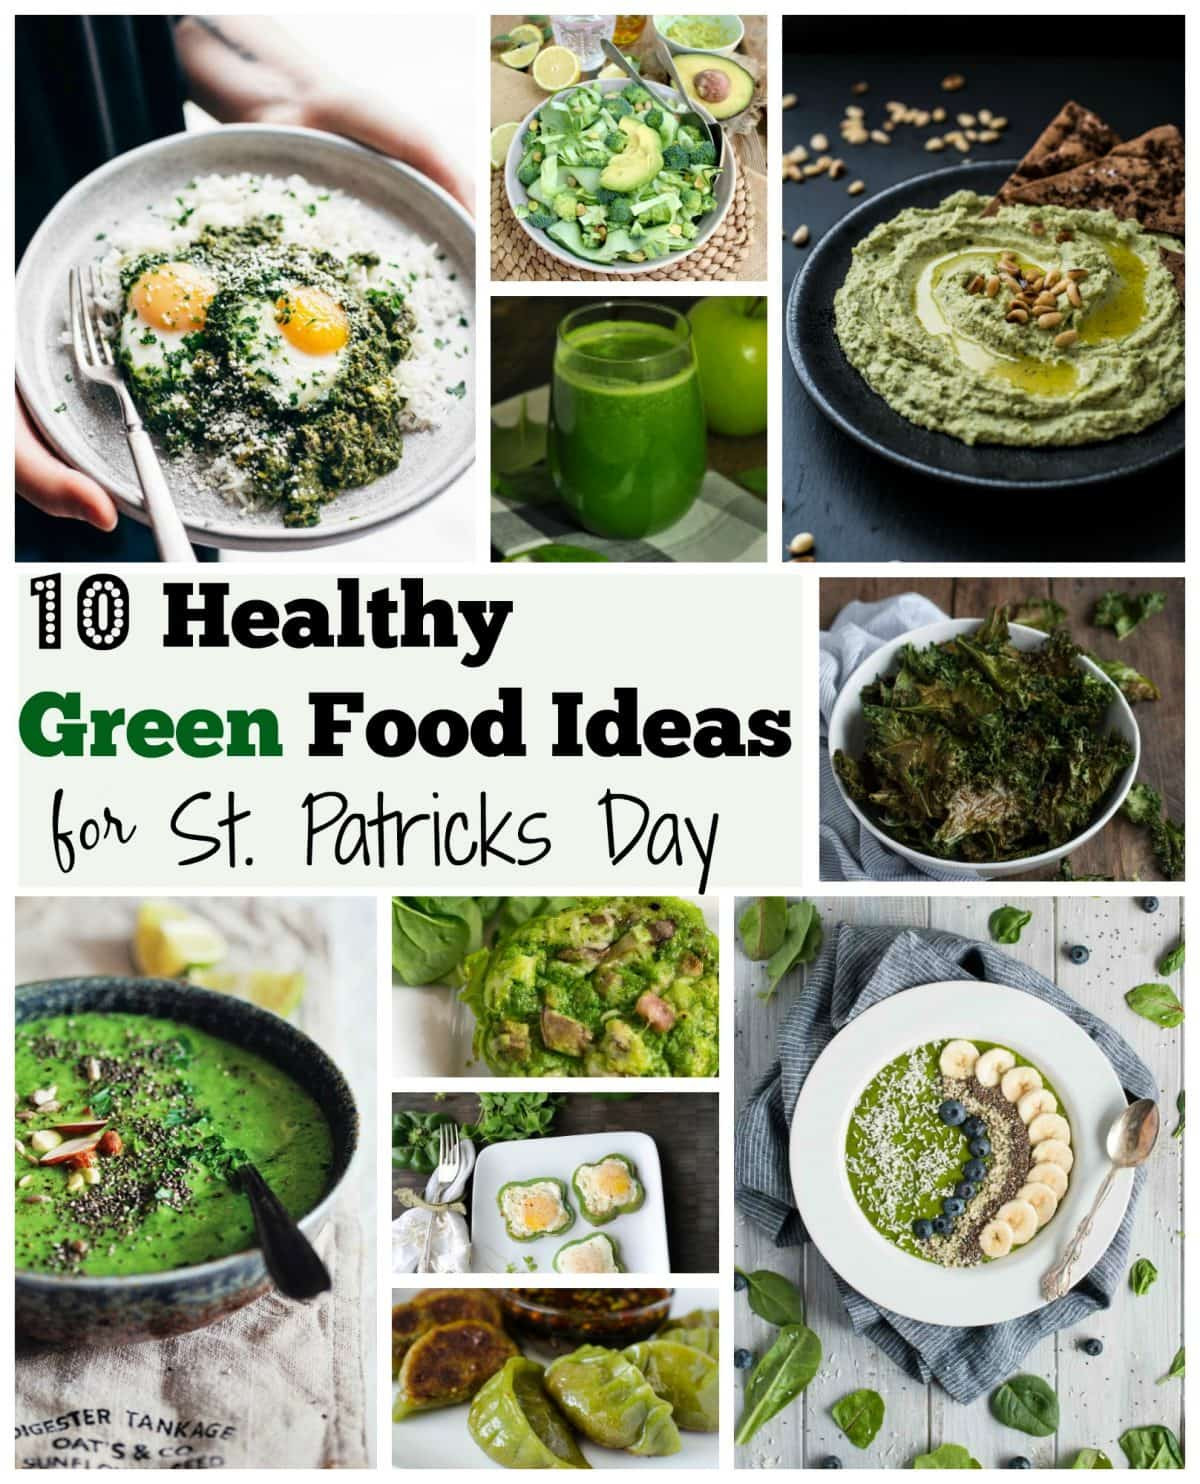 Green Food For St Patrick's Day
 10 Healthy Green Food Ideas for St Patricks Day